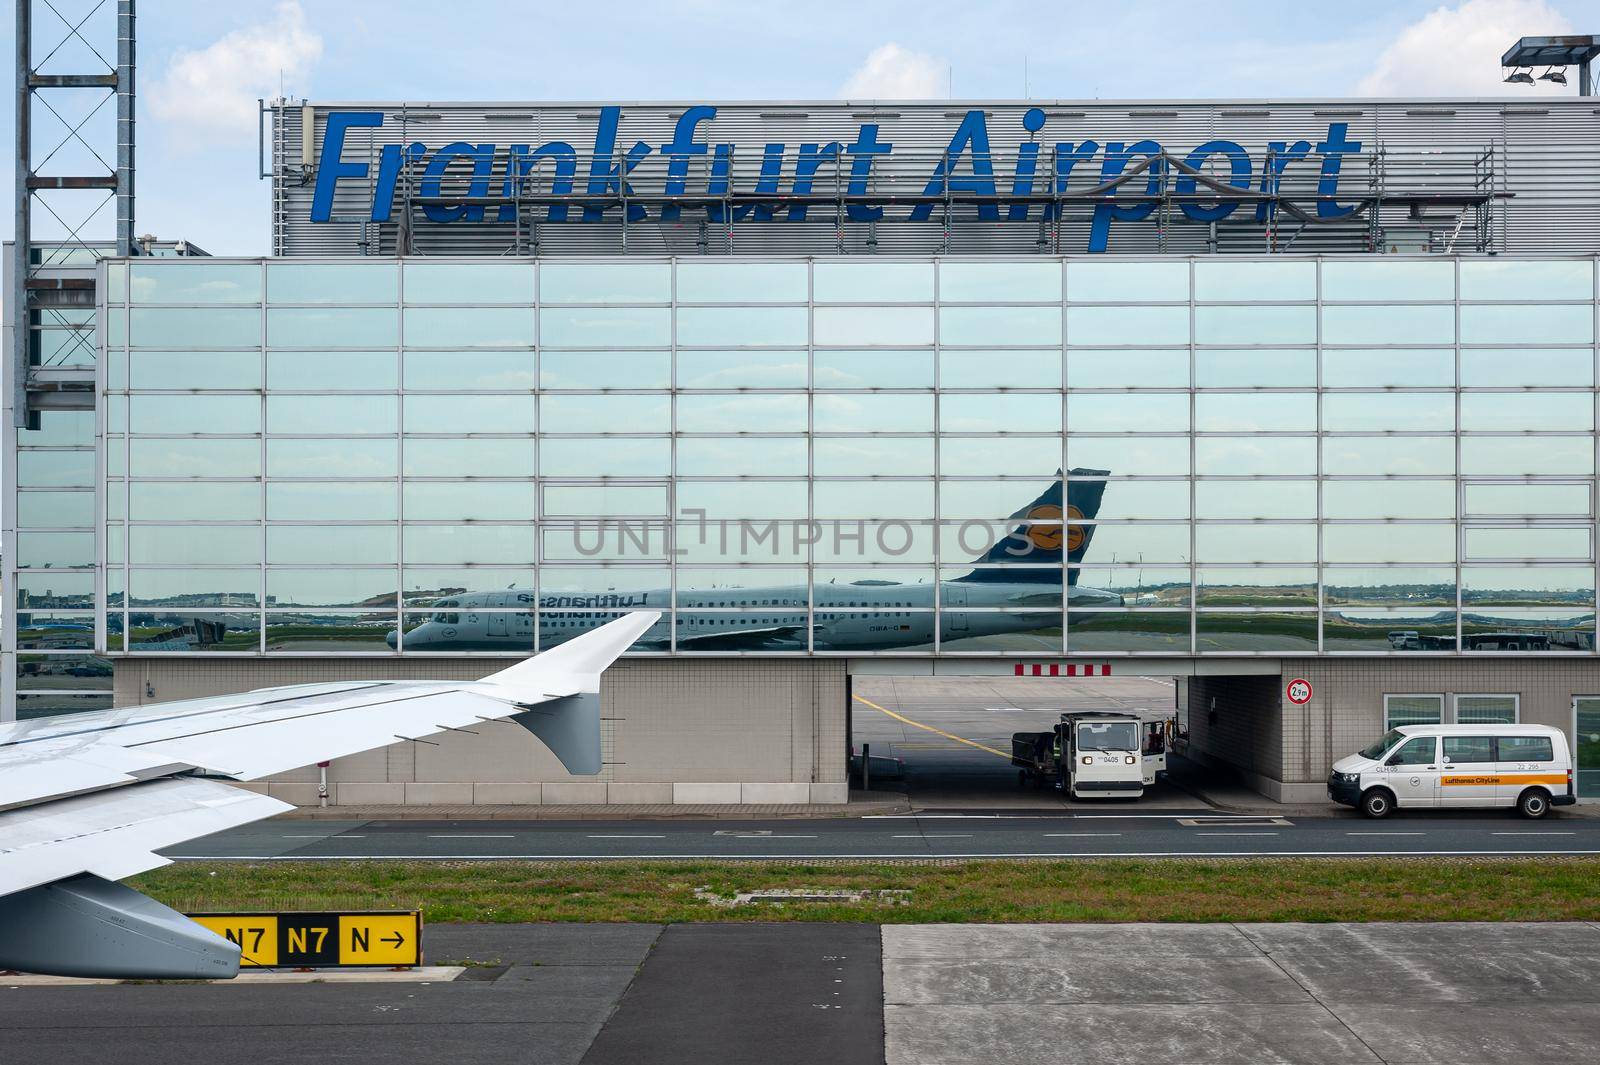 05/26/2019. Frankfurt Airport, Germany. Operated by Fraport and serves as the main hub for Lufthansa including Lufthansa City Line and Lufthansa Cargo and Lufthansa Technik.